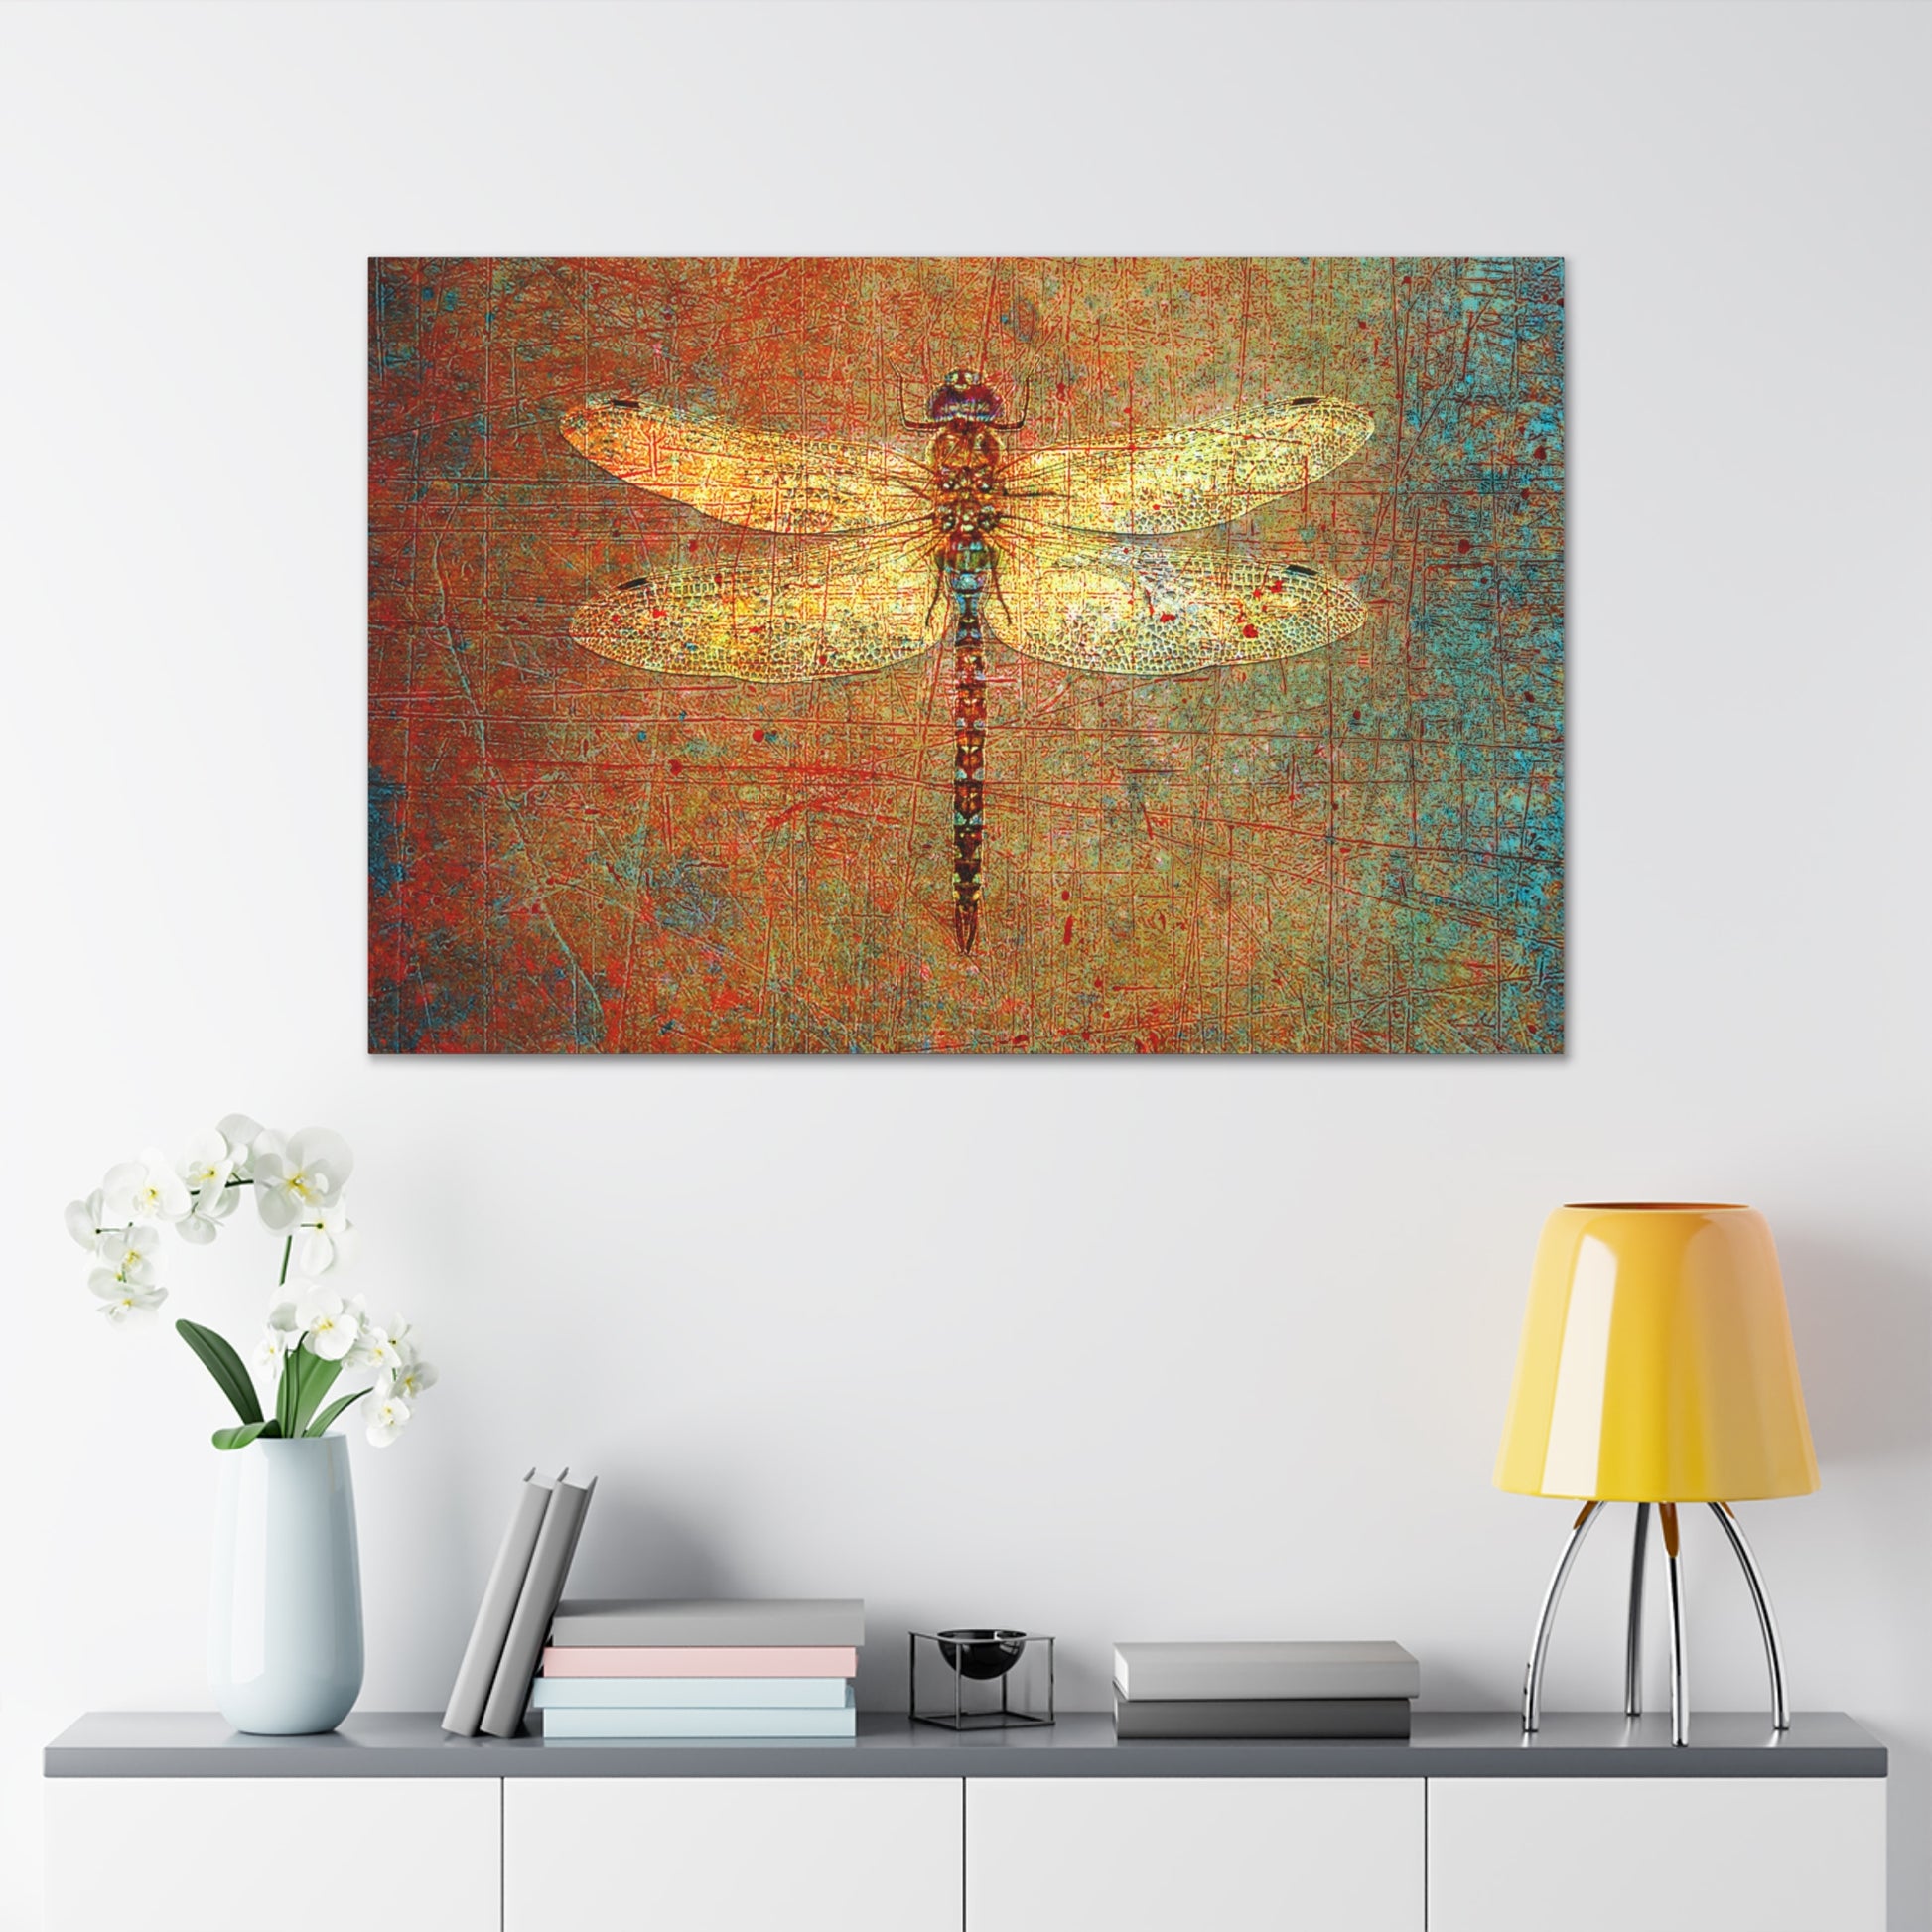 Golden Dragonfly on Distressed Orange and Green Background Print on Unframed Stretched Canvas 48x32